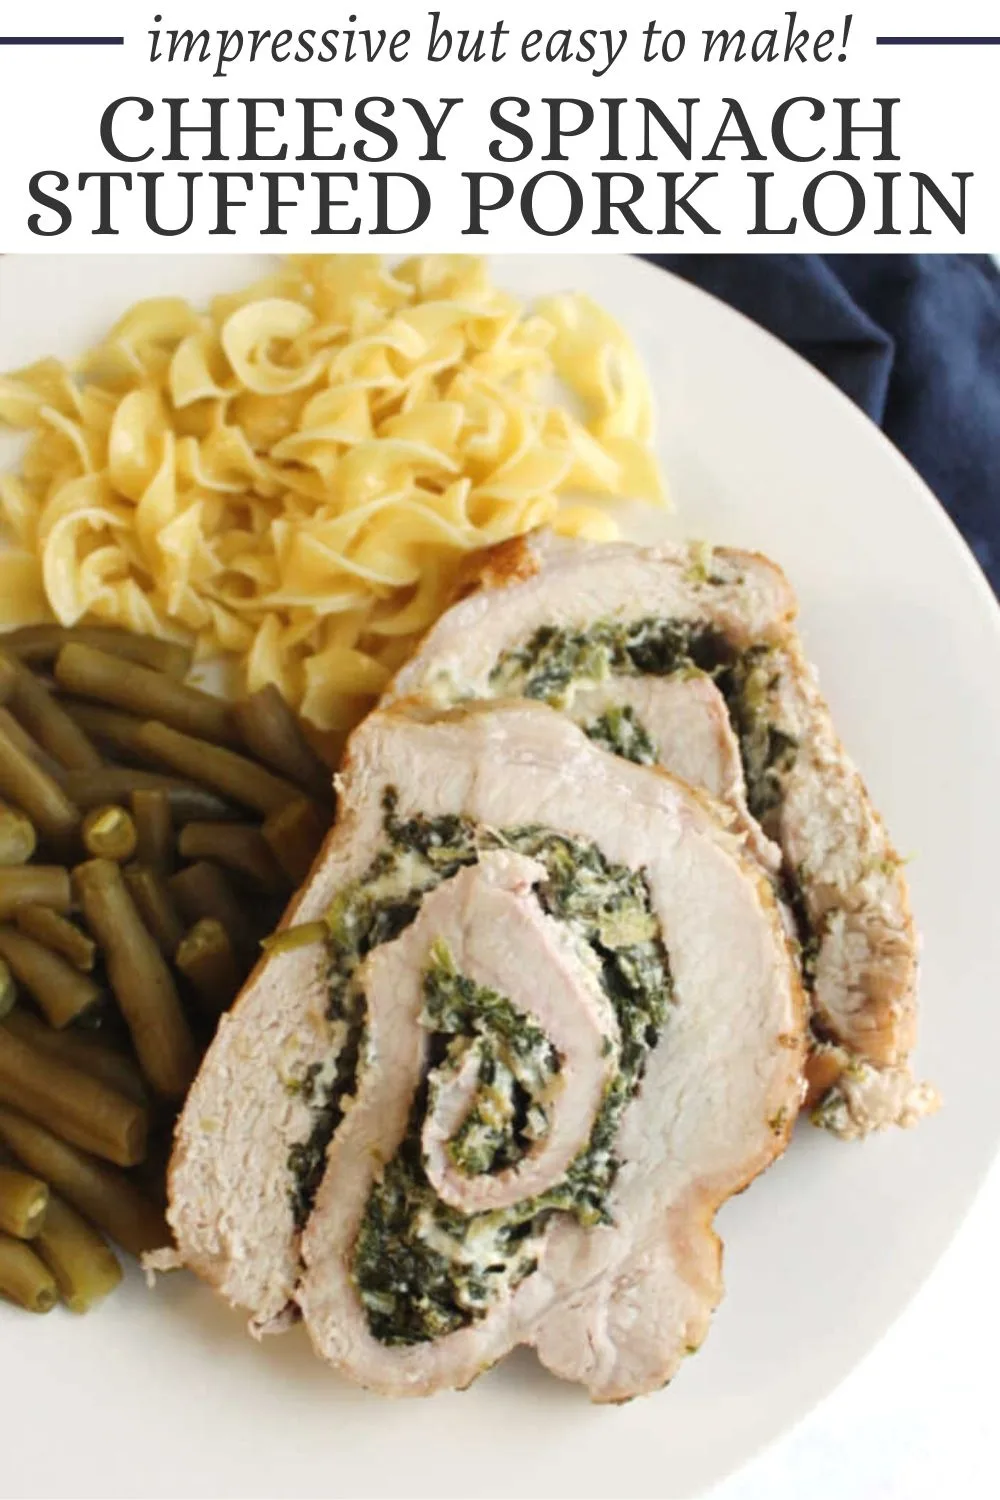 Just look at this pork loin wrapped around a filling of Parmesan cheese and spinach. It comes together really pretty easily and tastes amazing!